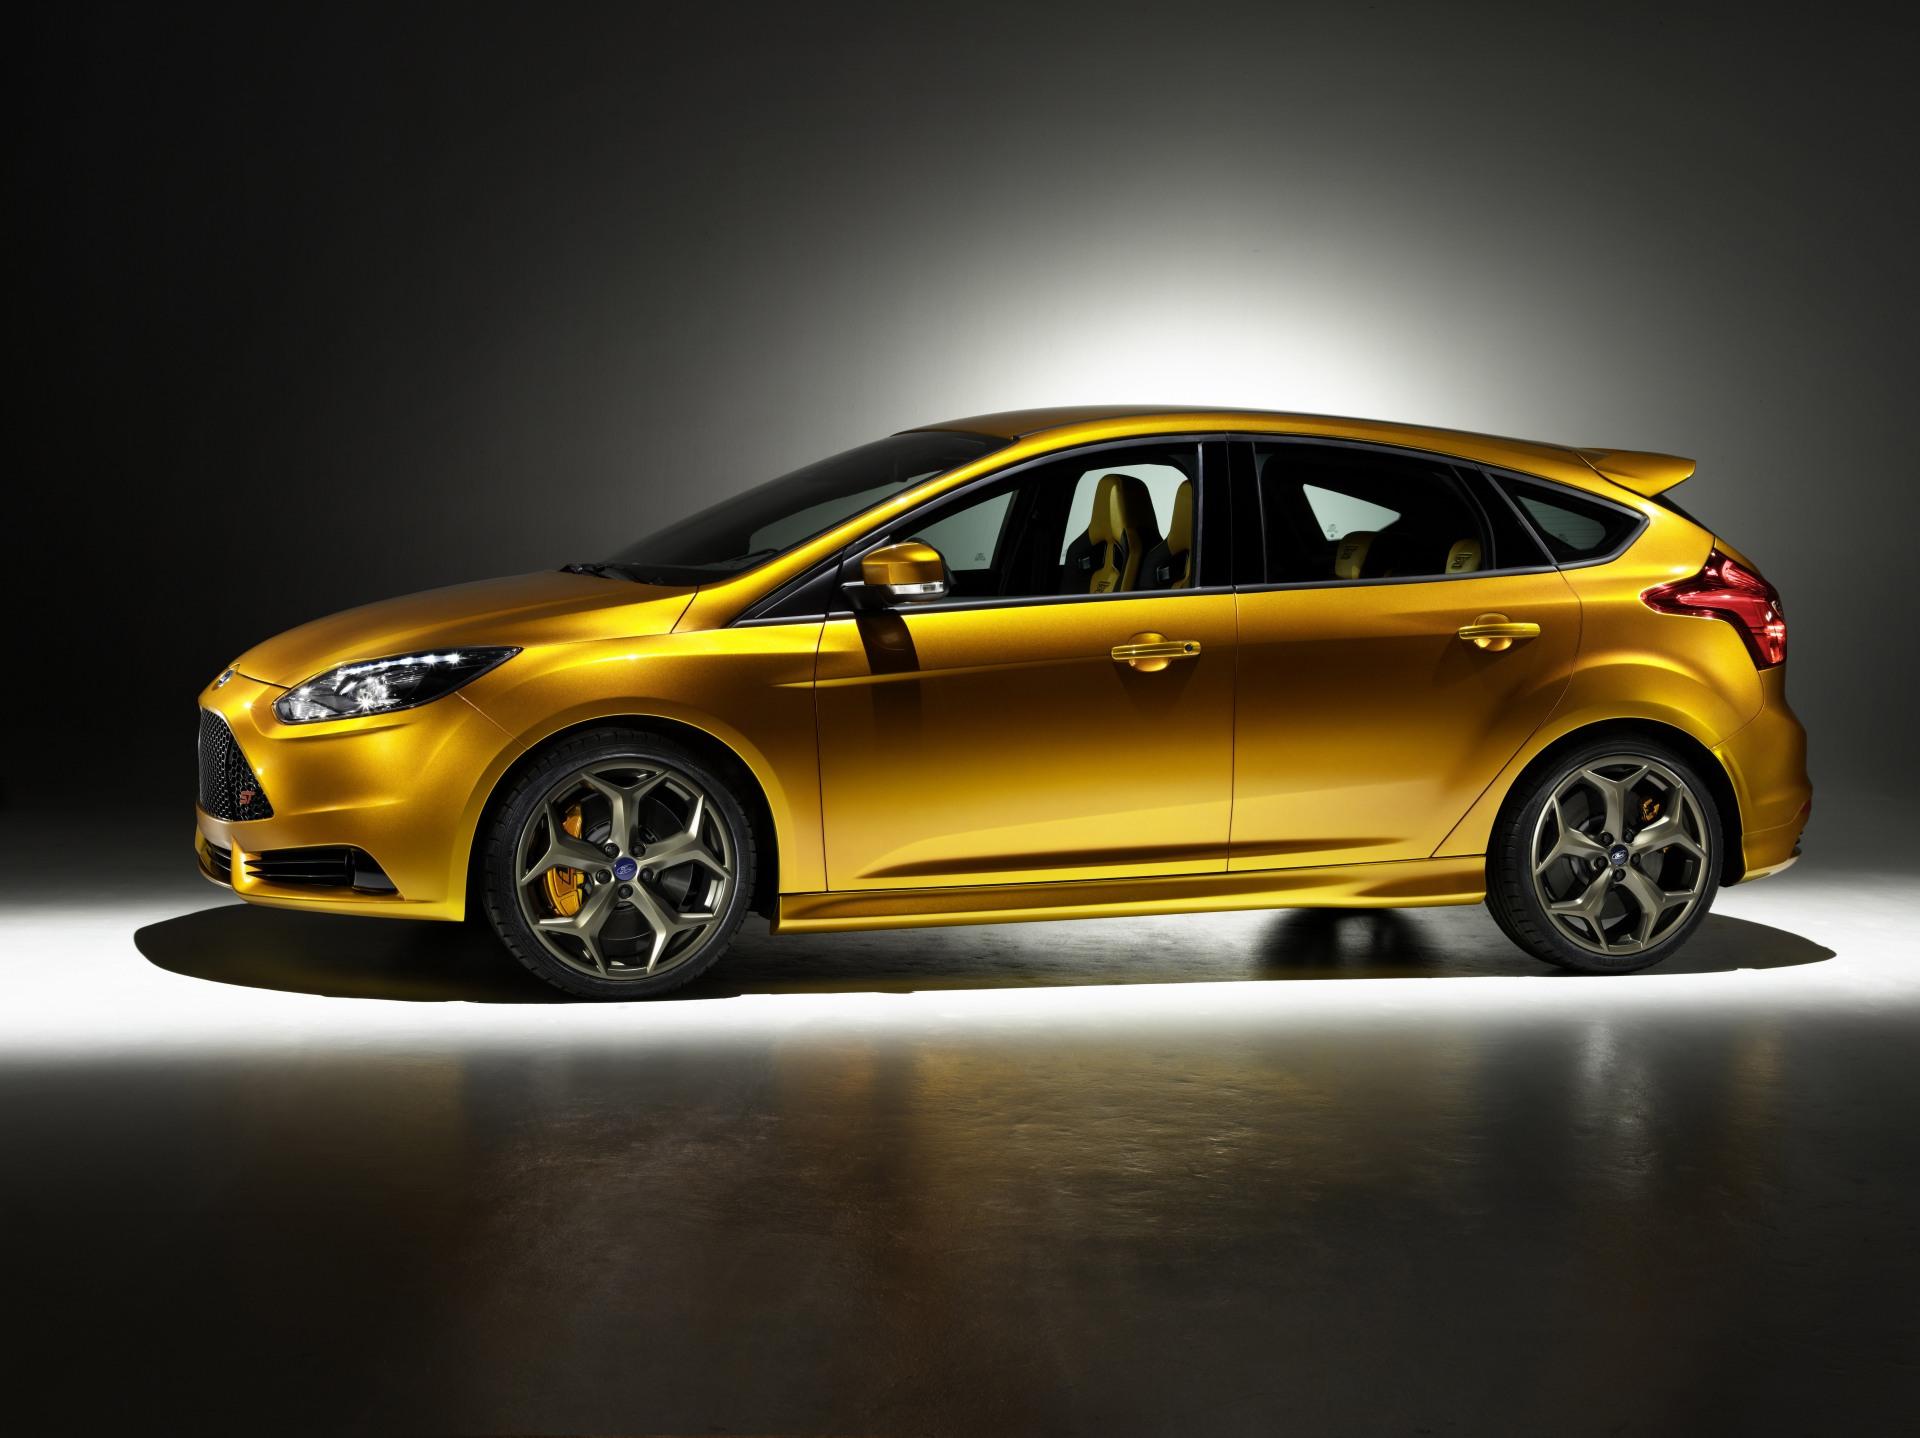 2011 Ford Focus ST News and Information - conceptcarz.com